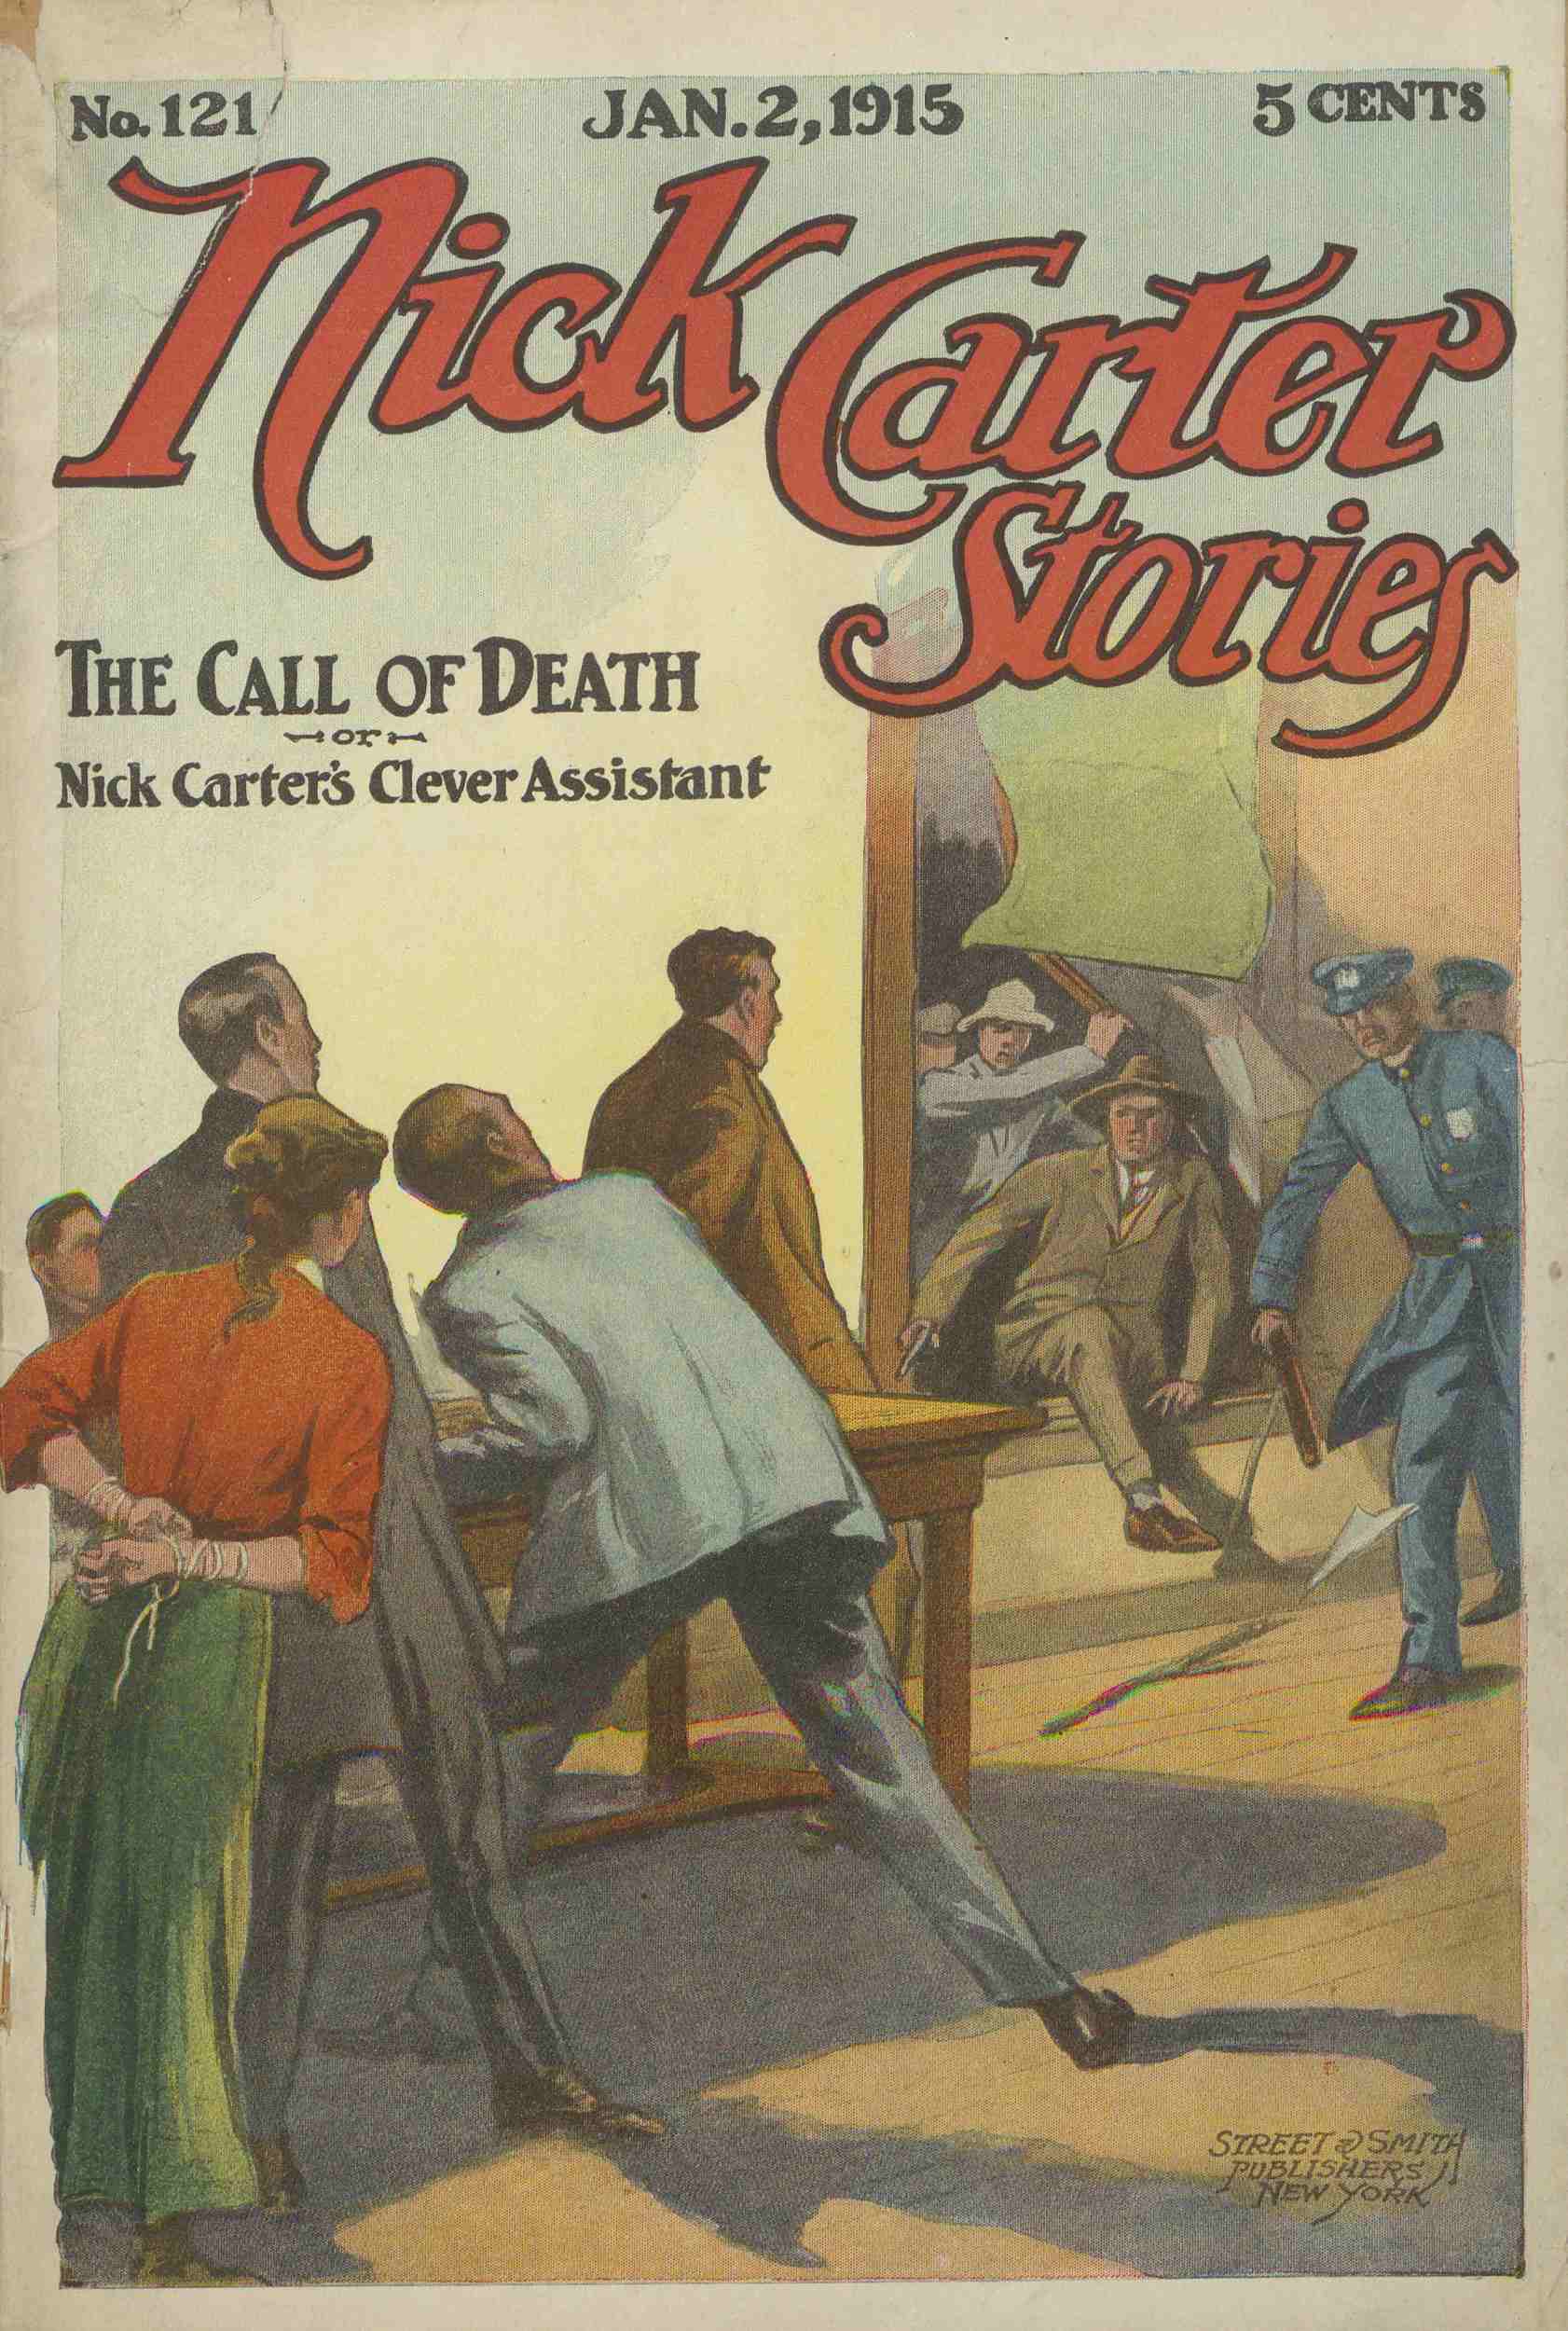 Nick Carter Stories No. 121, January 2, 1915: The call of death; or, Nick Carter's clever assistant